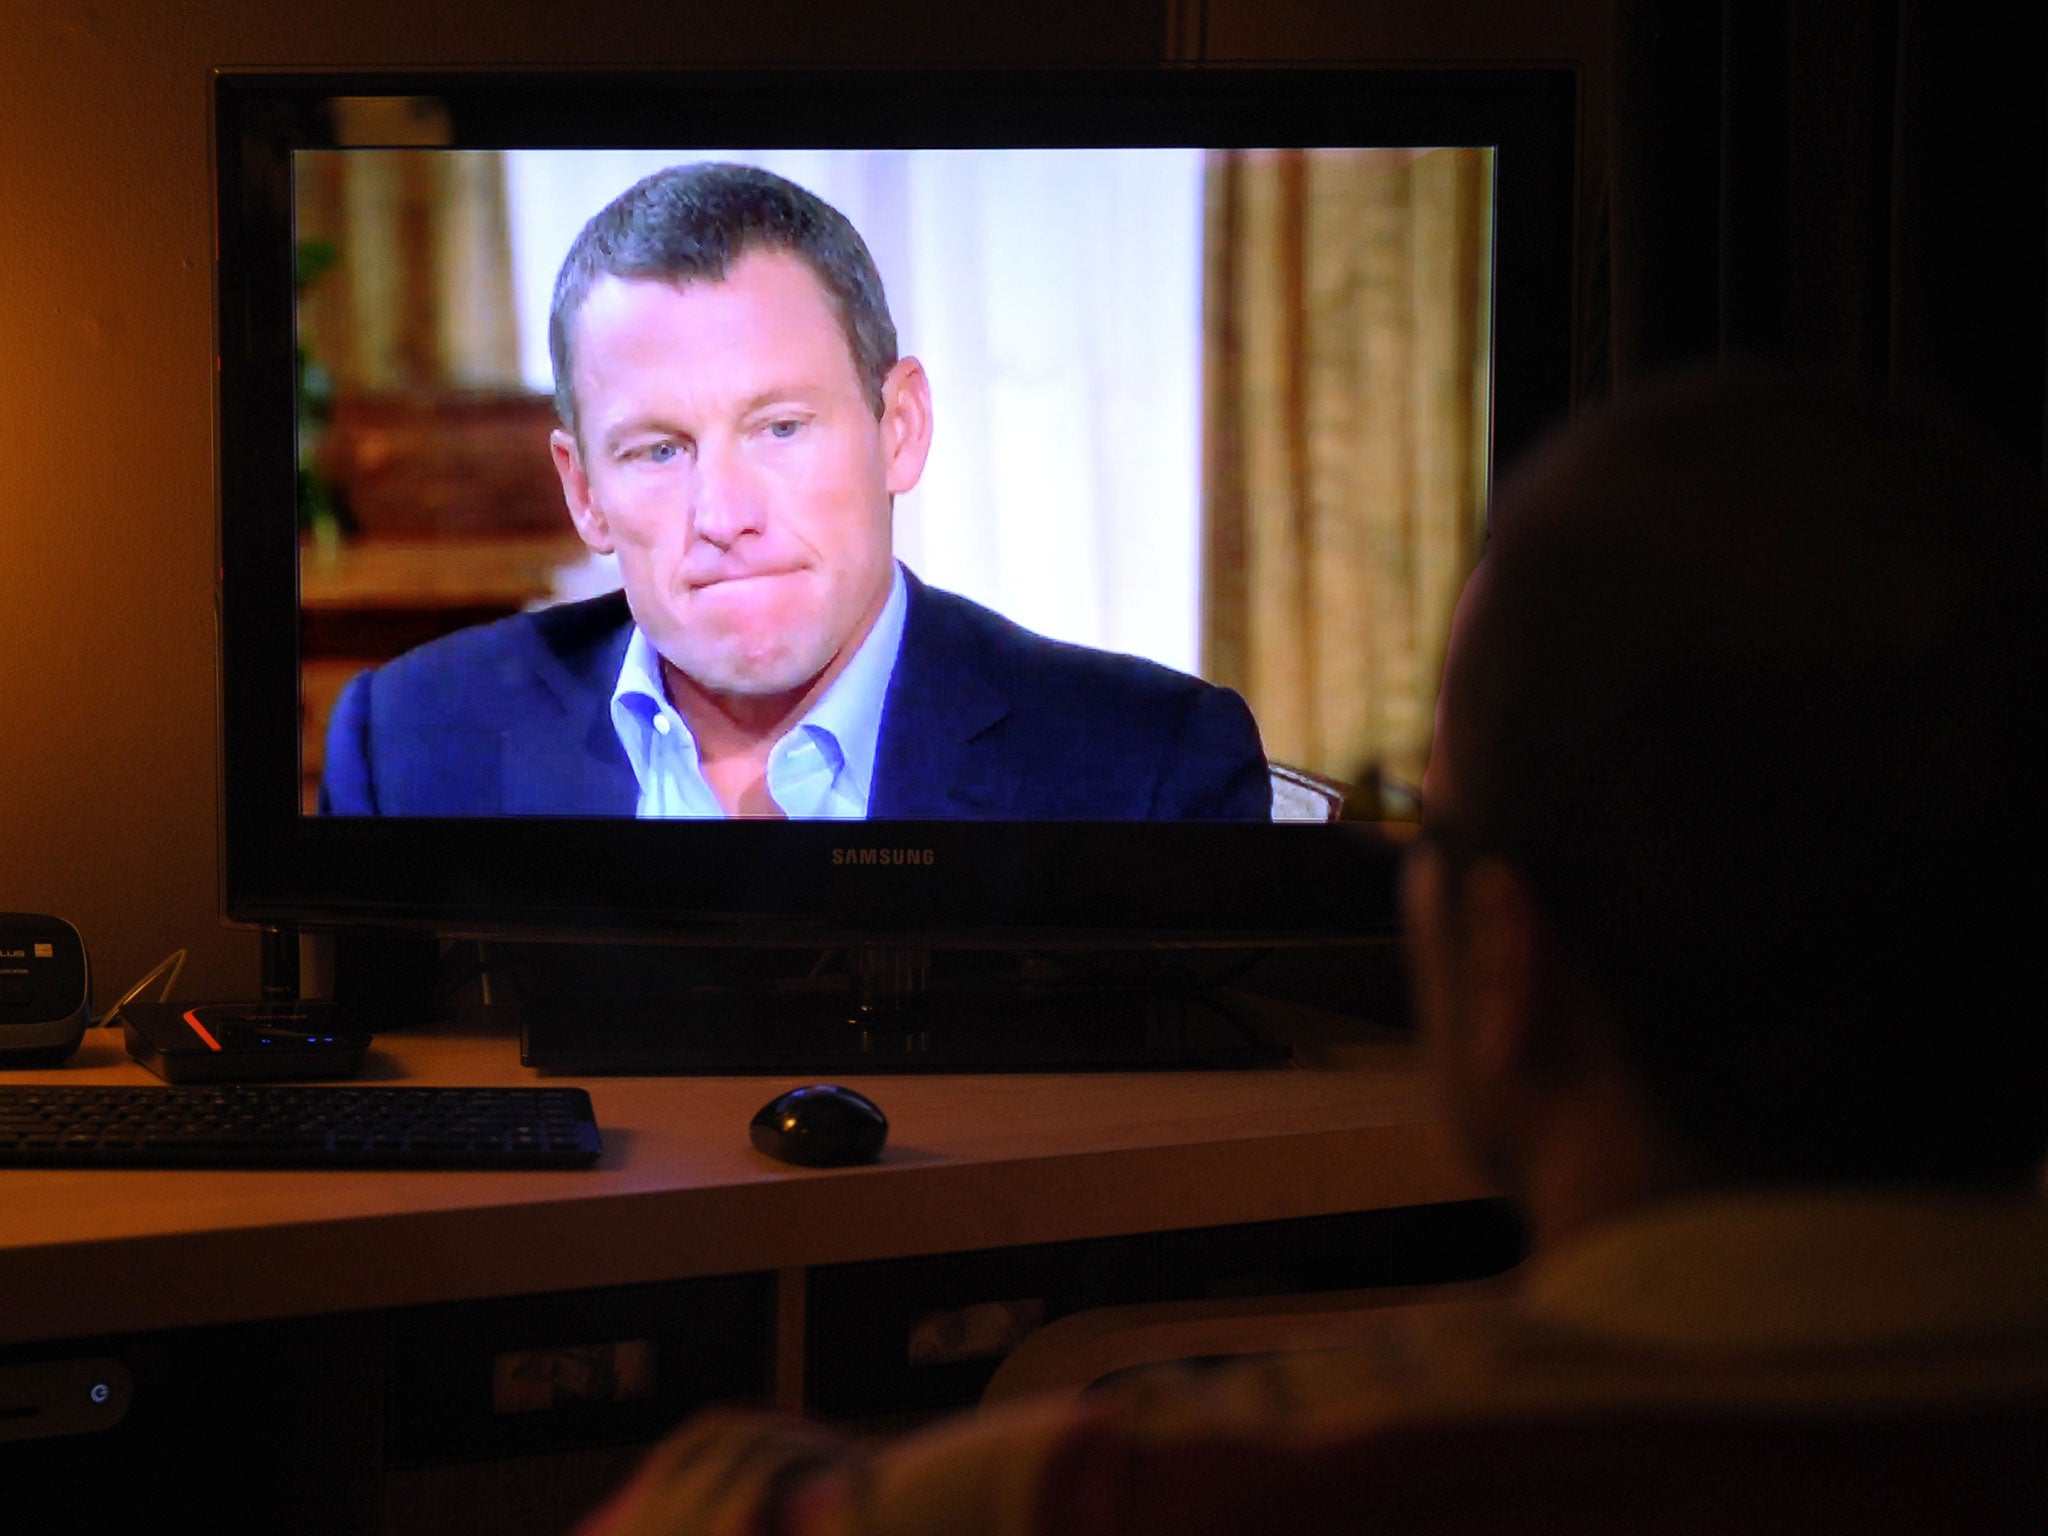 Lance Armstrong during his second interview with Oprah Winfrey